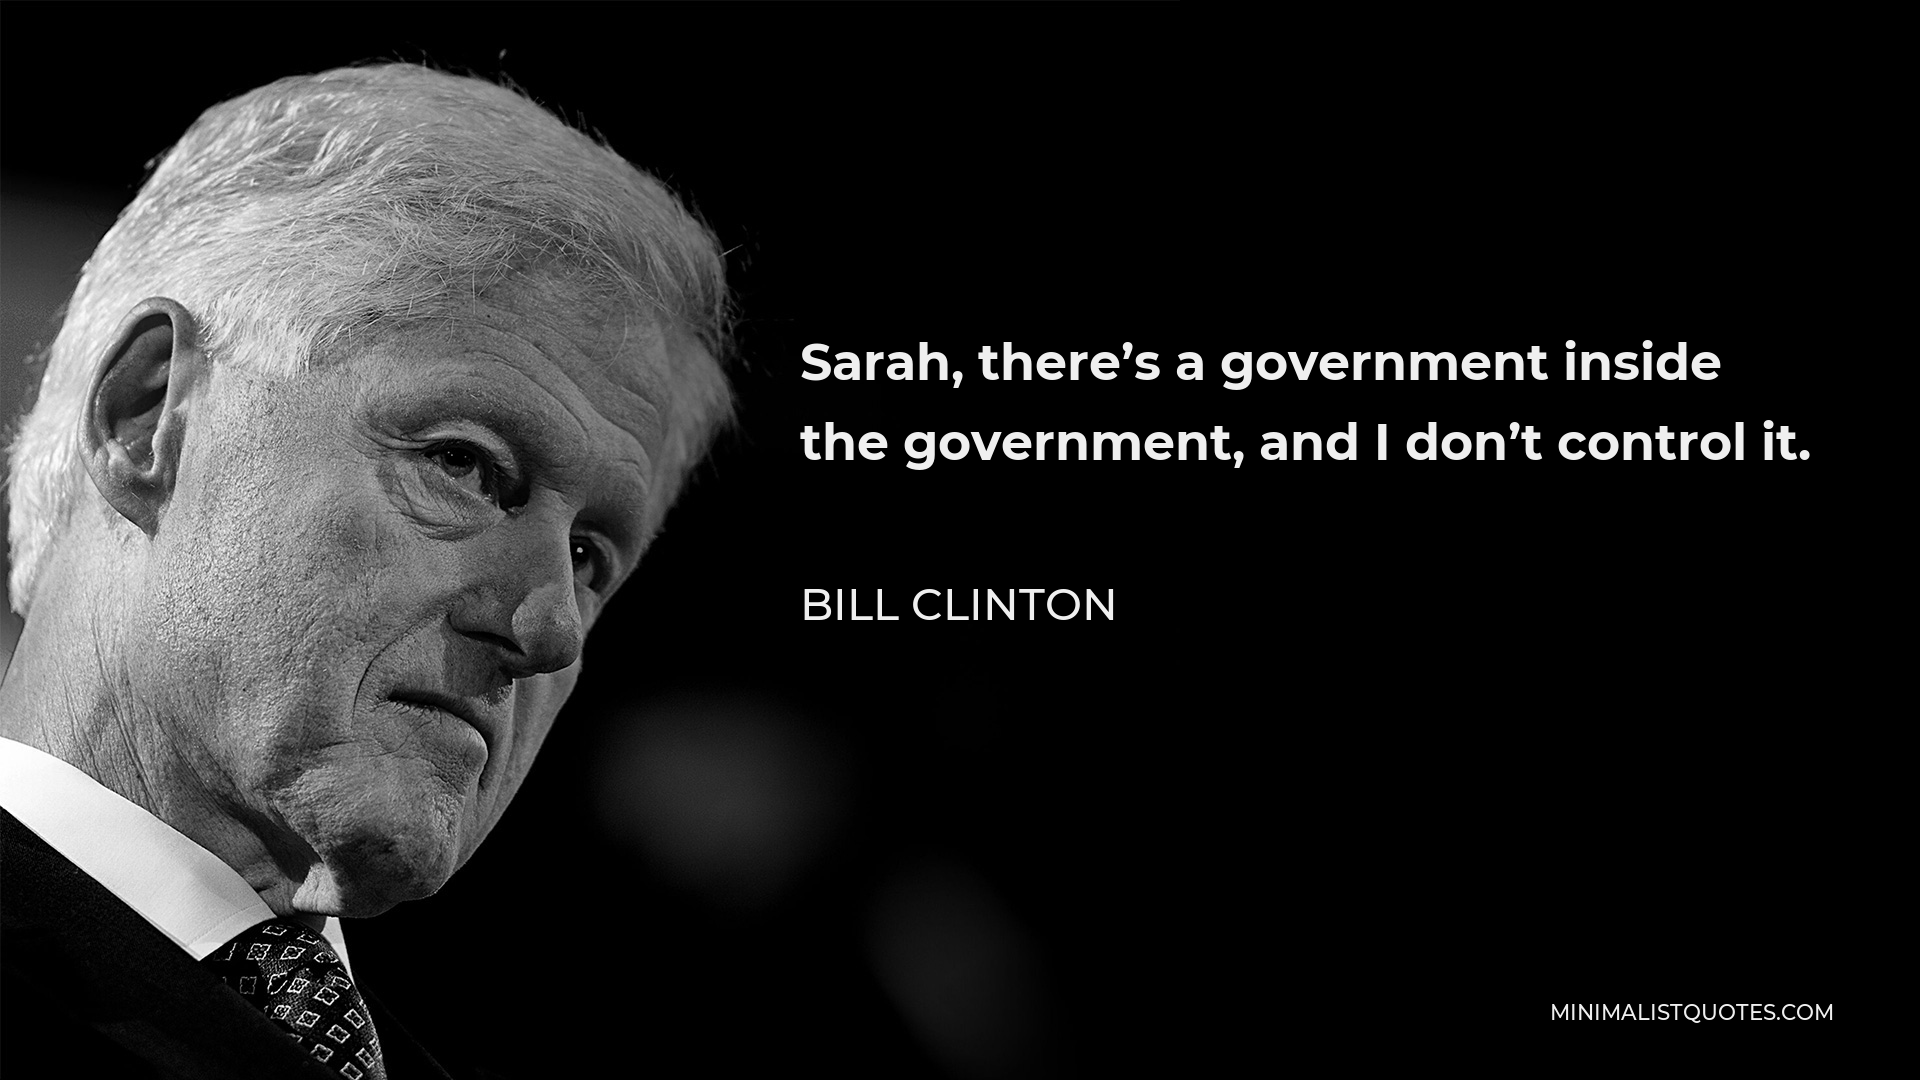 Bill Clinton Quote - Sarah, there’s a government inside the government, and I don’t control it.